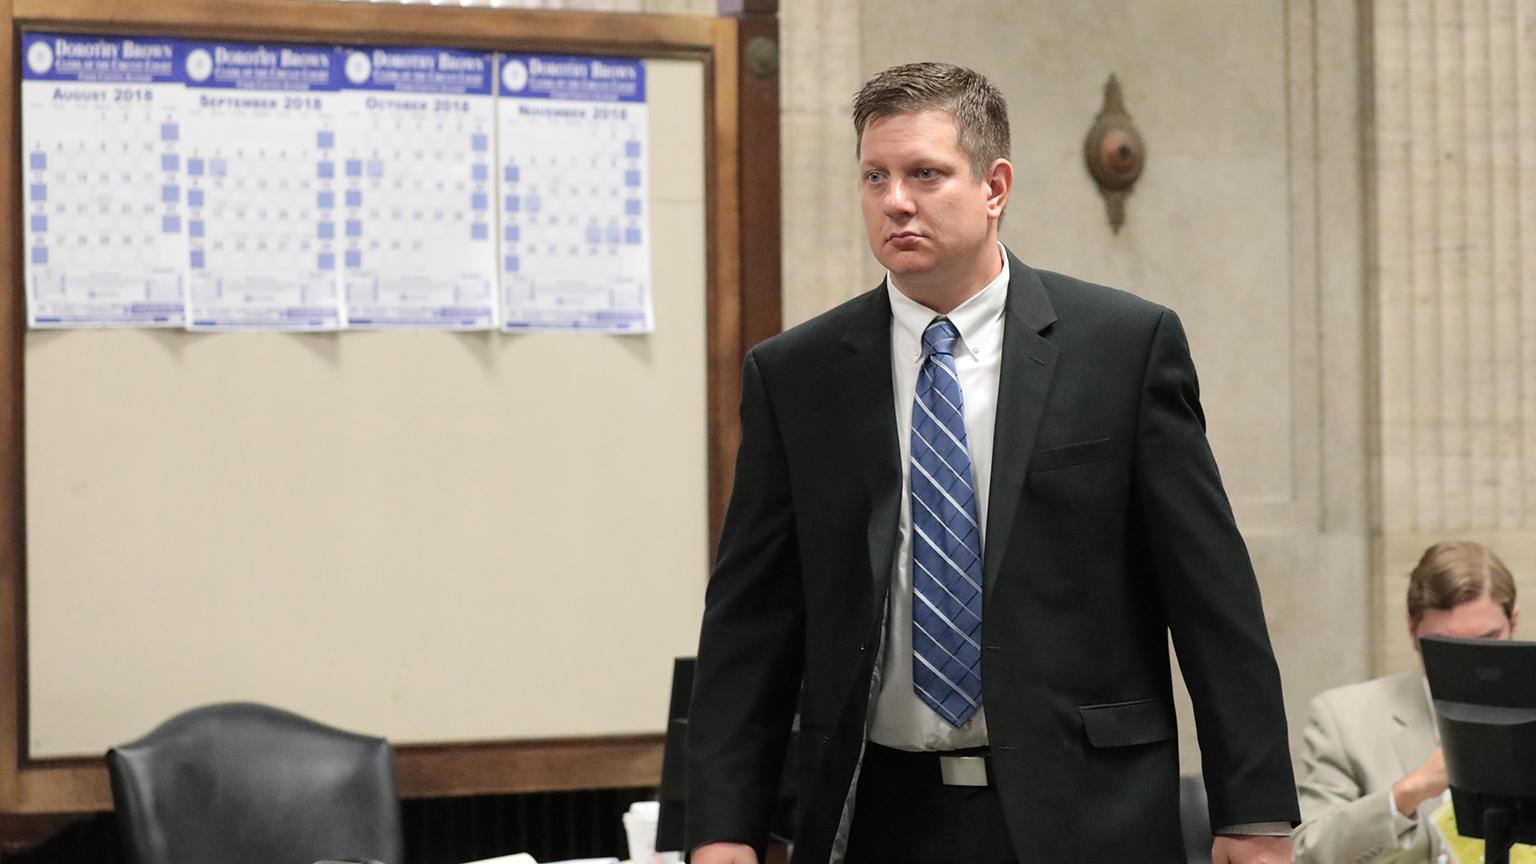 Chicago police Officer Jason Van Dyke approaches the judge’s bench at a hearing for the shooting death of Laquan McDonald, at the Leighton Criminal Court Building on Wednesday, Aug. 15, 2018. (Antonio Perez / Chicago Tribune / Pool)